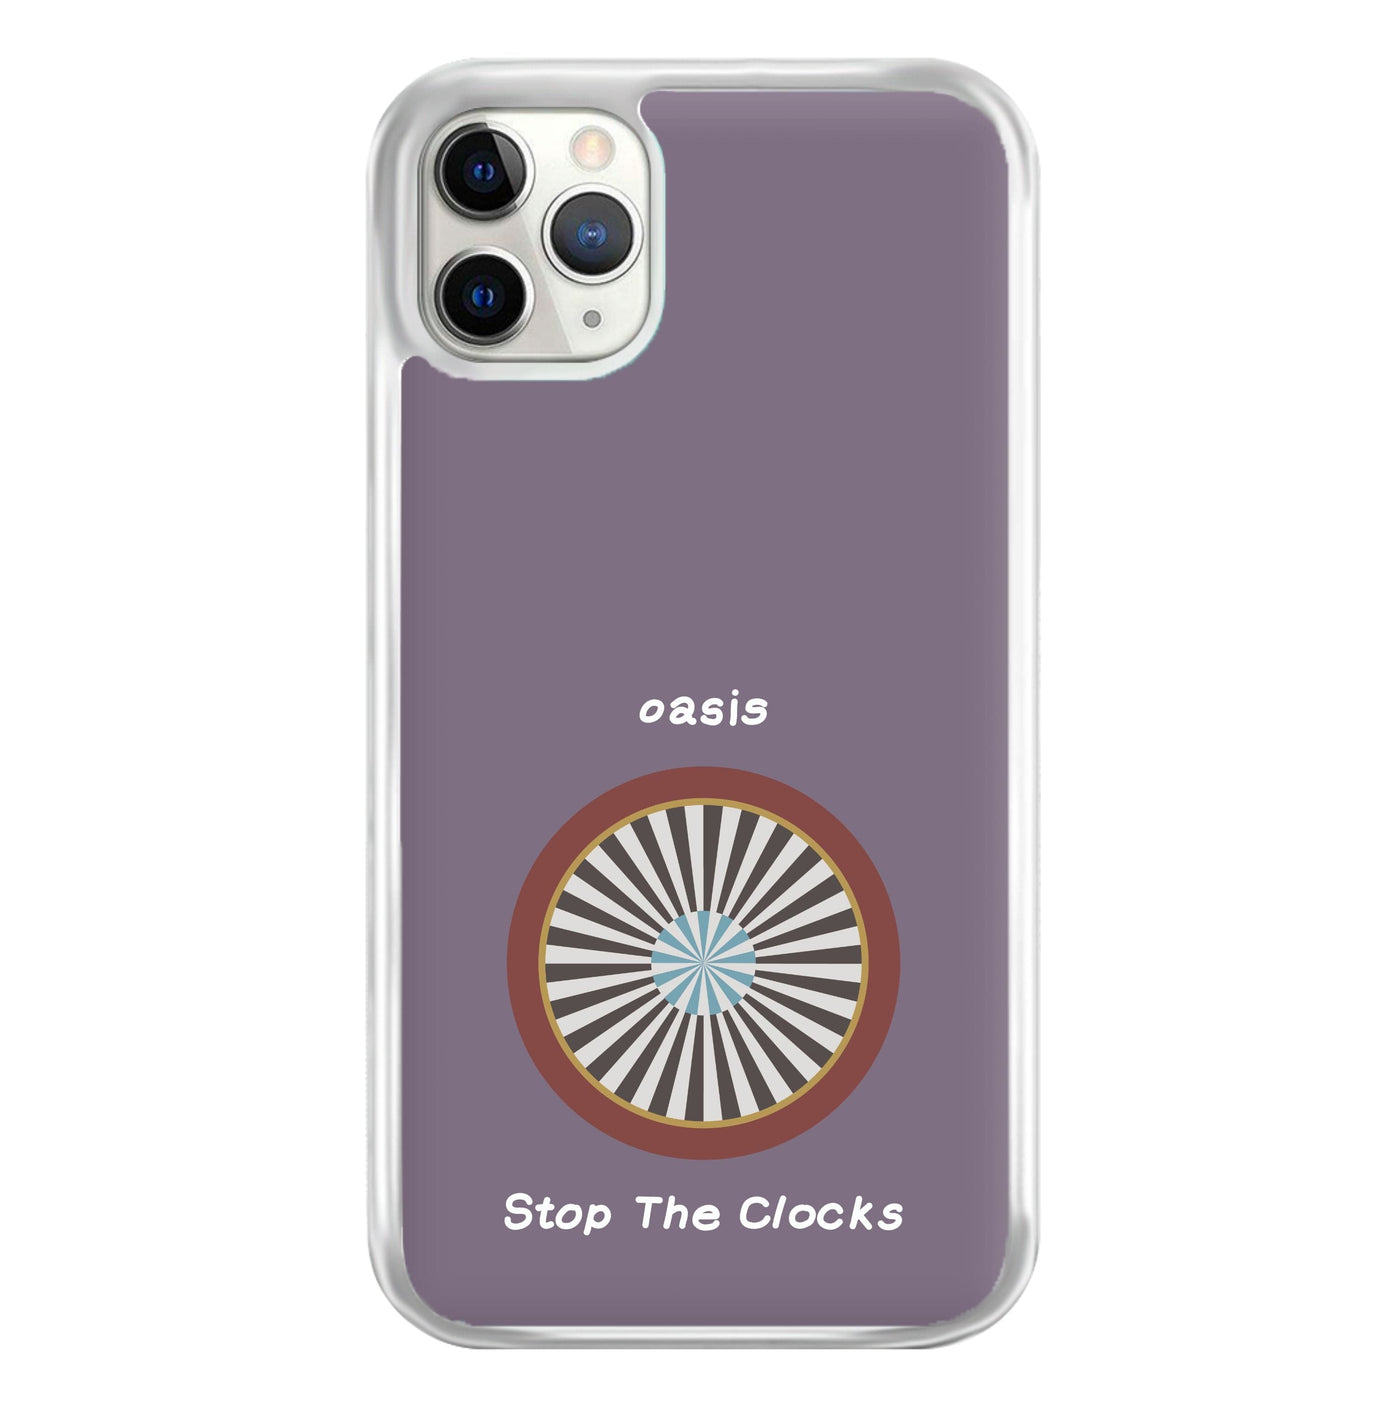 Stop The Clocks - Oasis Phone Case